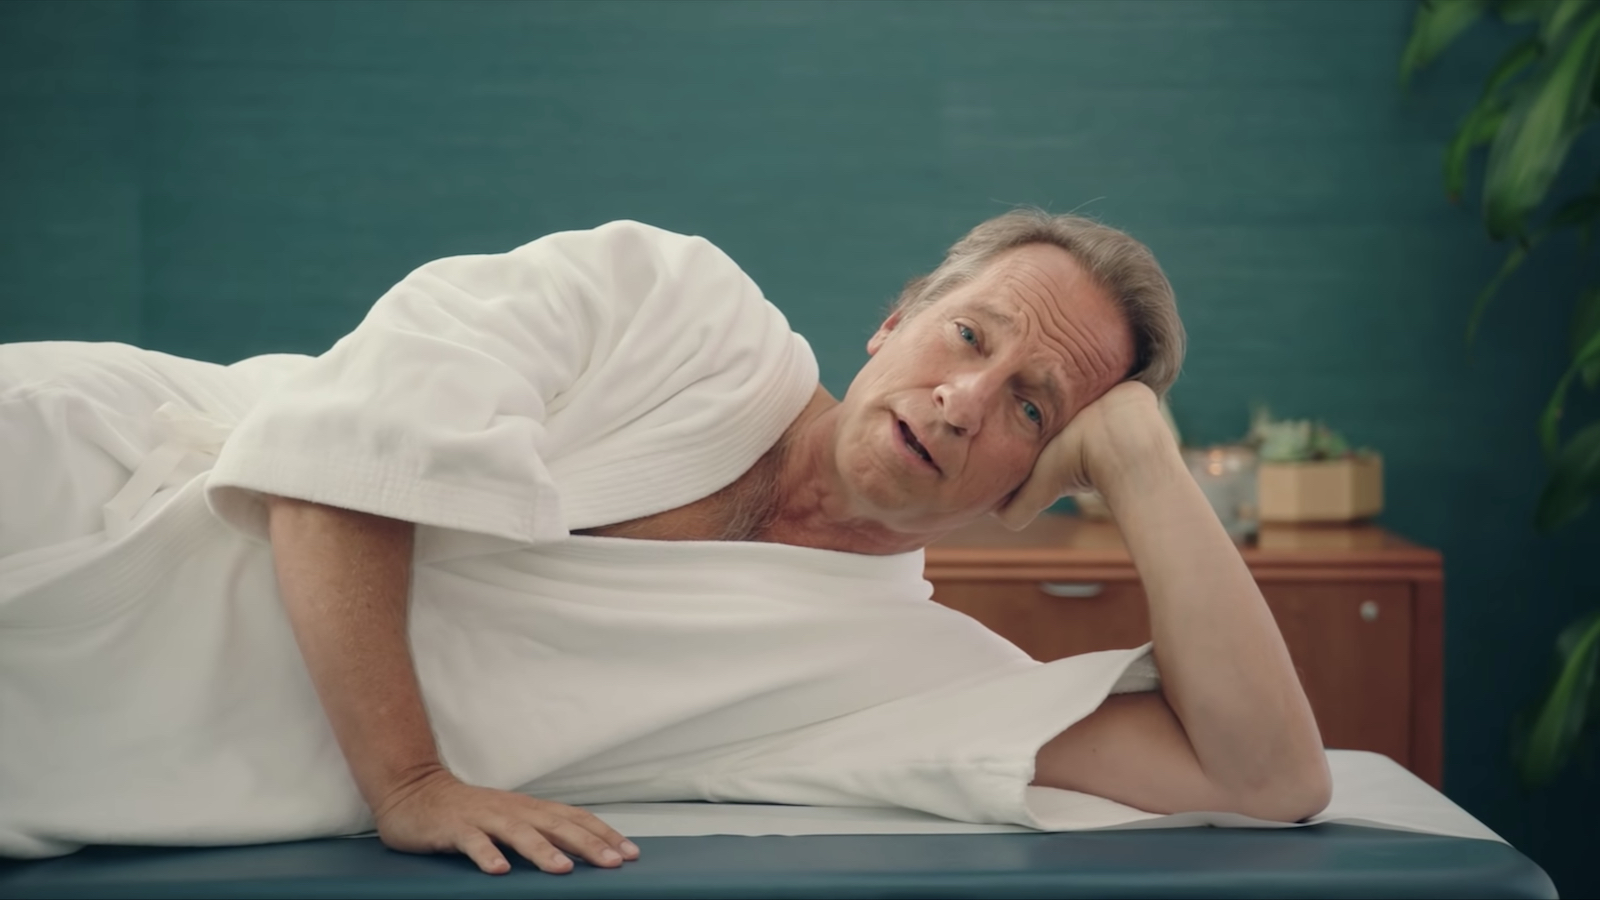 Mike Rowe Undergoes Actual Prostate Exam in Cancer Awareness Ad